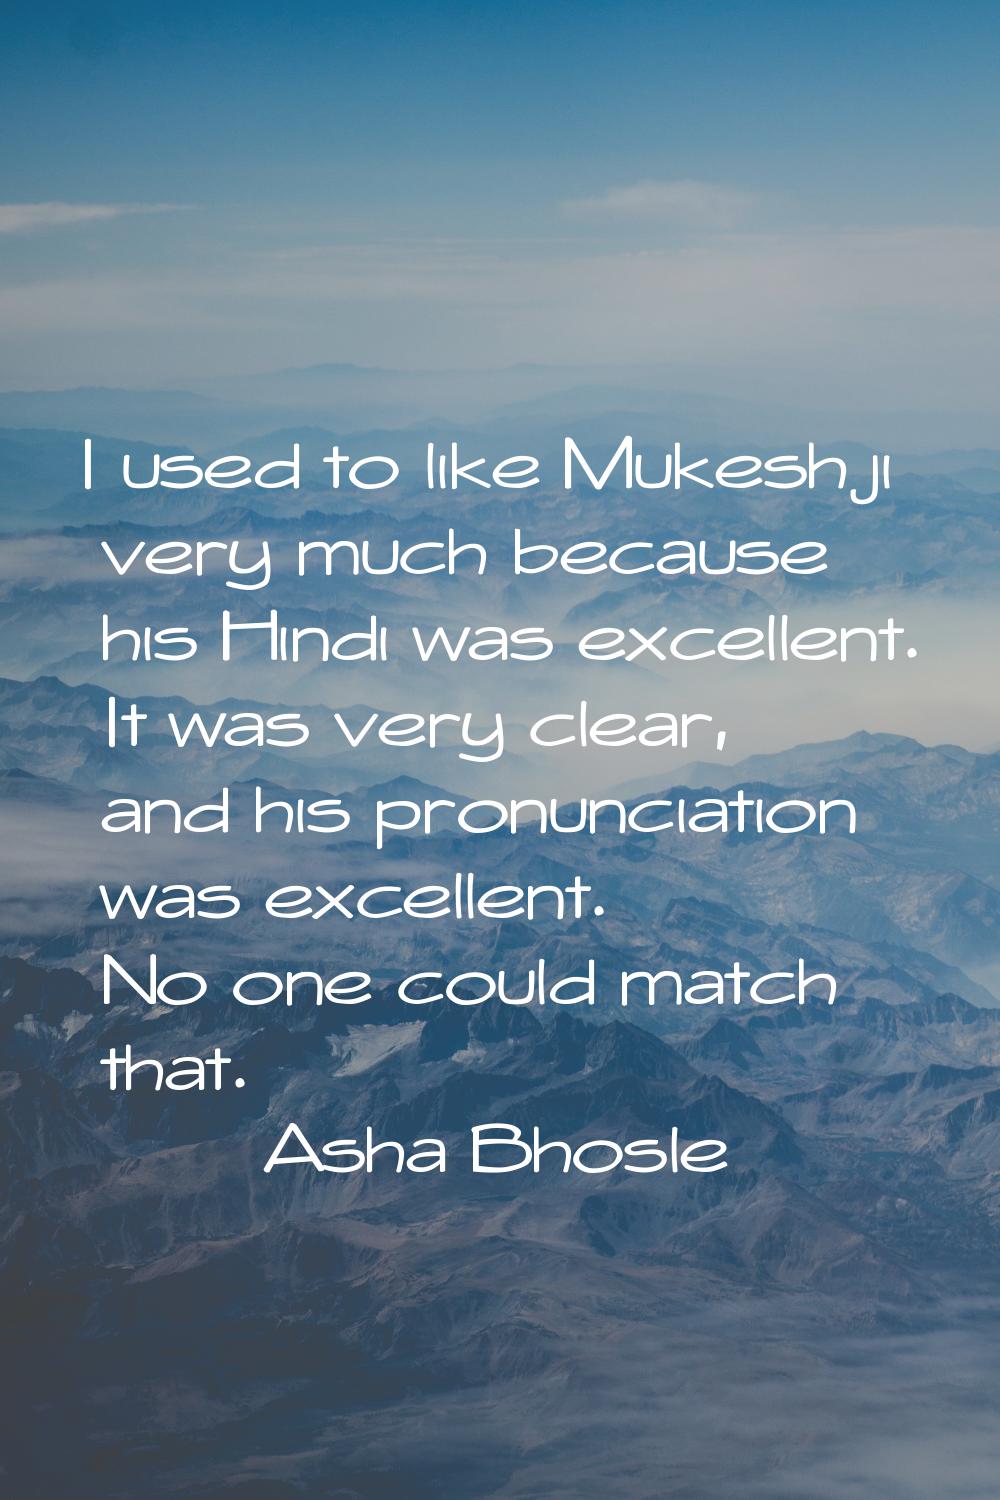 I used to like Mukeshji very much because his Hindi was excellent. It was very clear, and his pronu